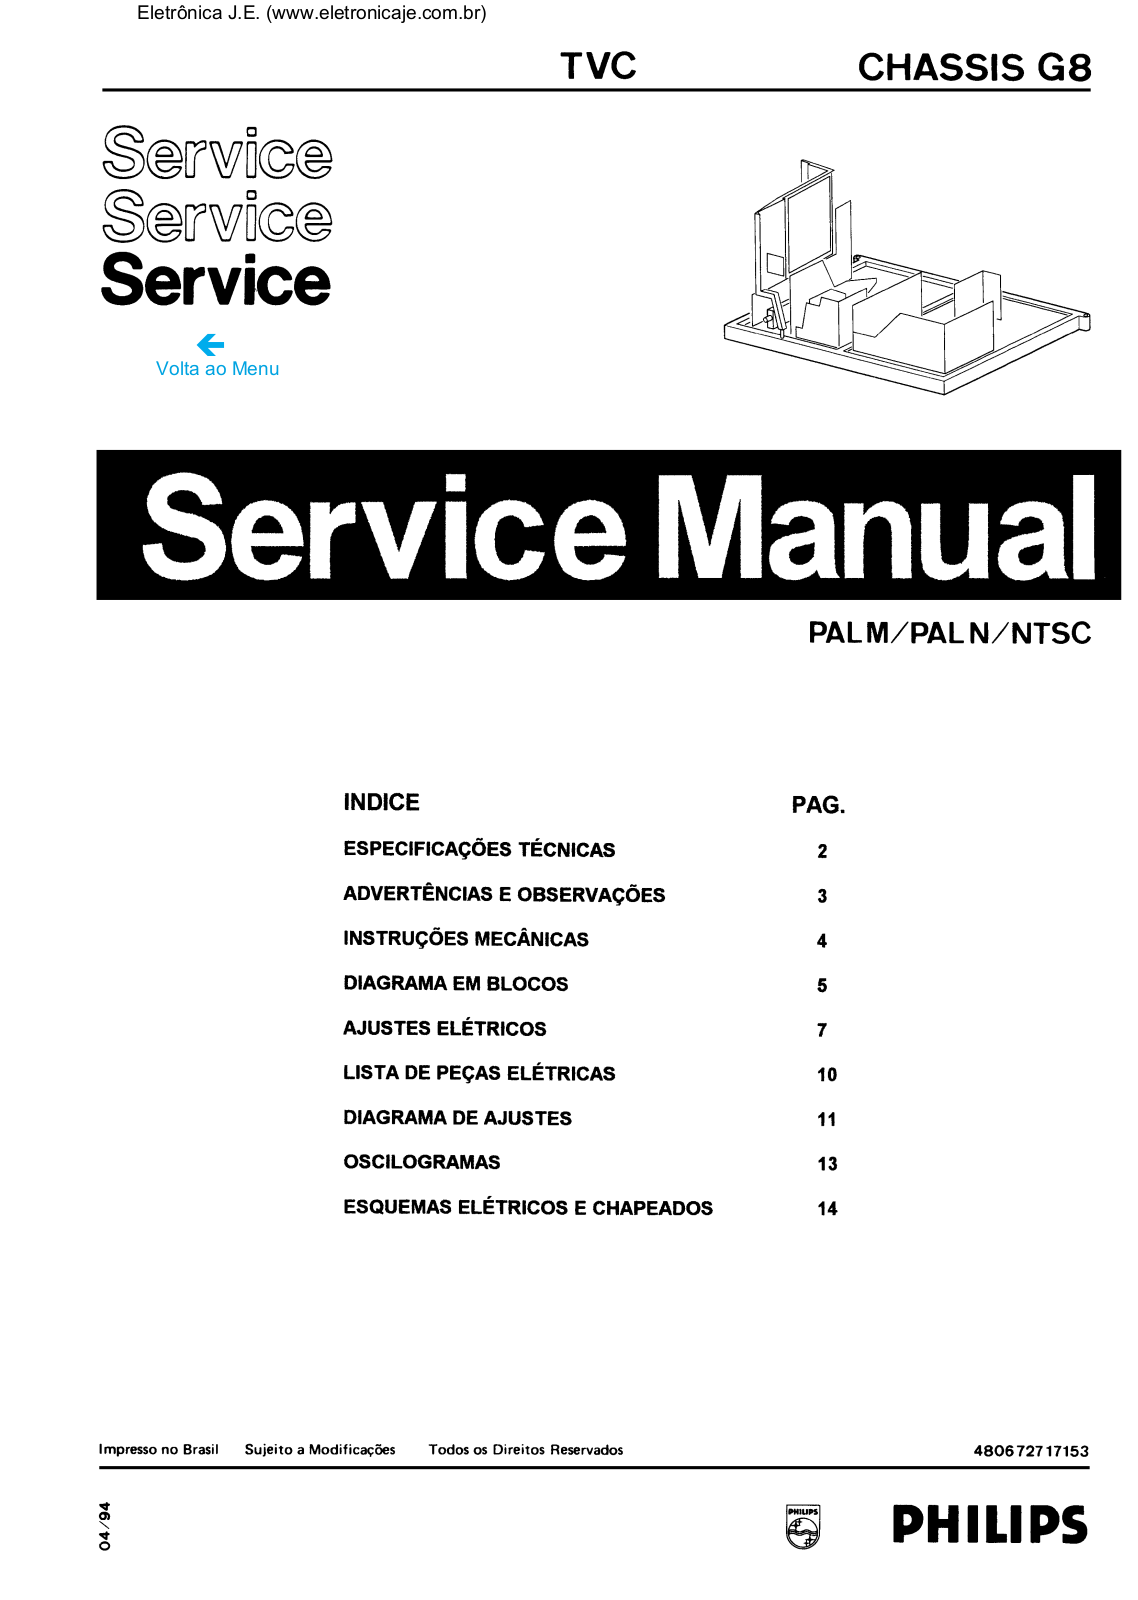 PHILIPS G8 Service Manual